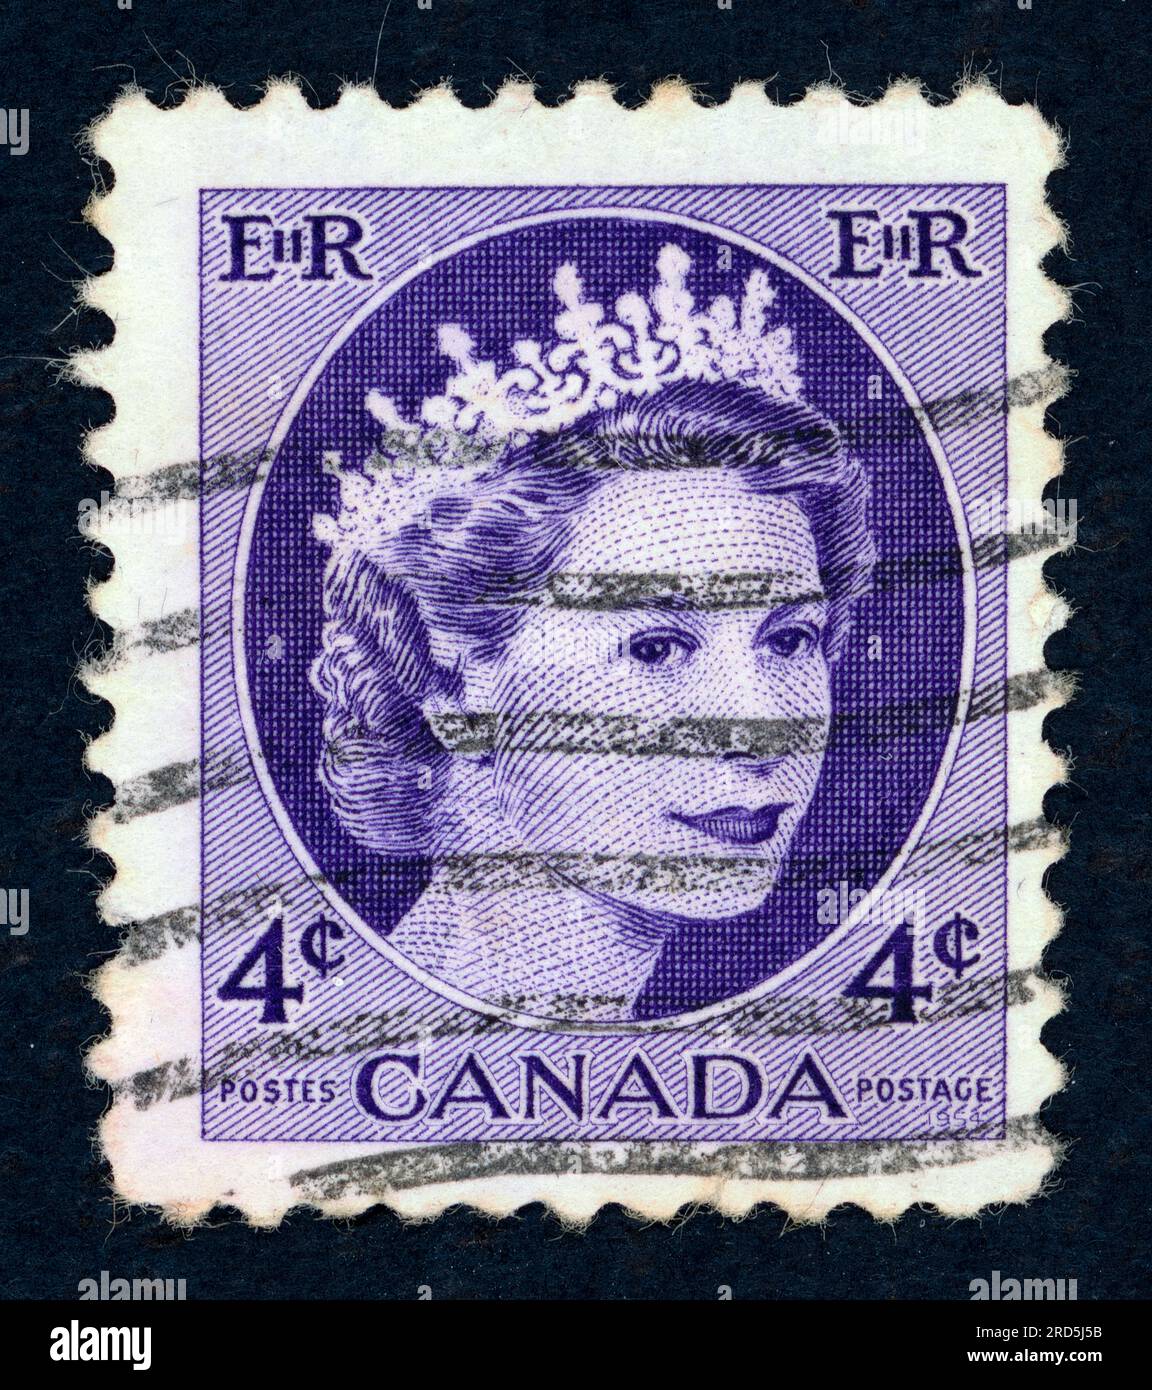 Queen Elizabeth II. Postage stamp issued in Canada in 1950s. Stock Photo